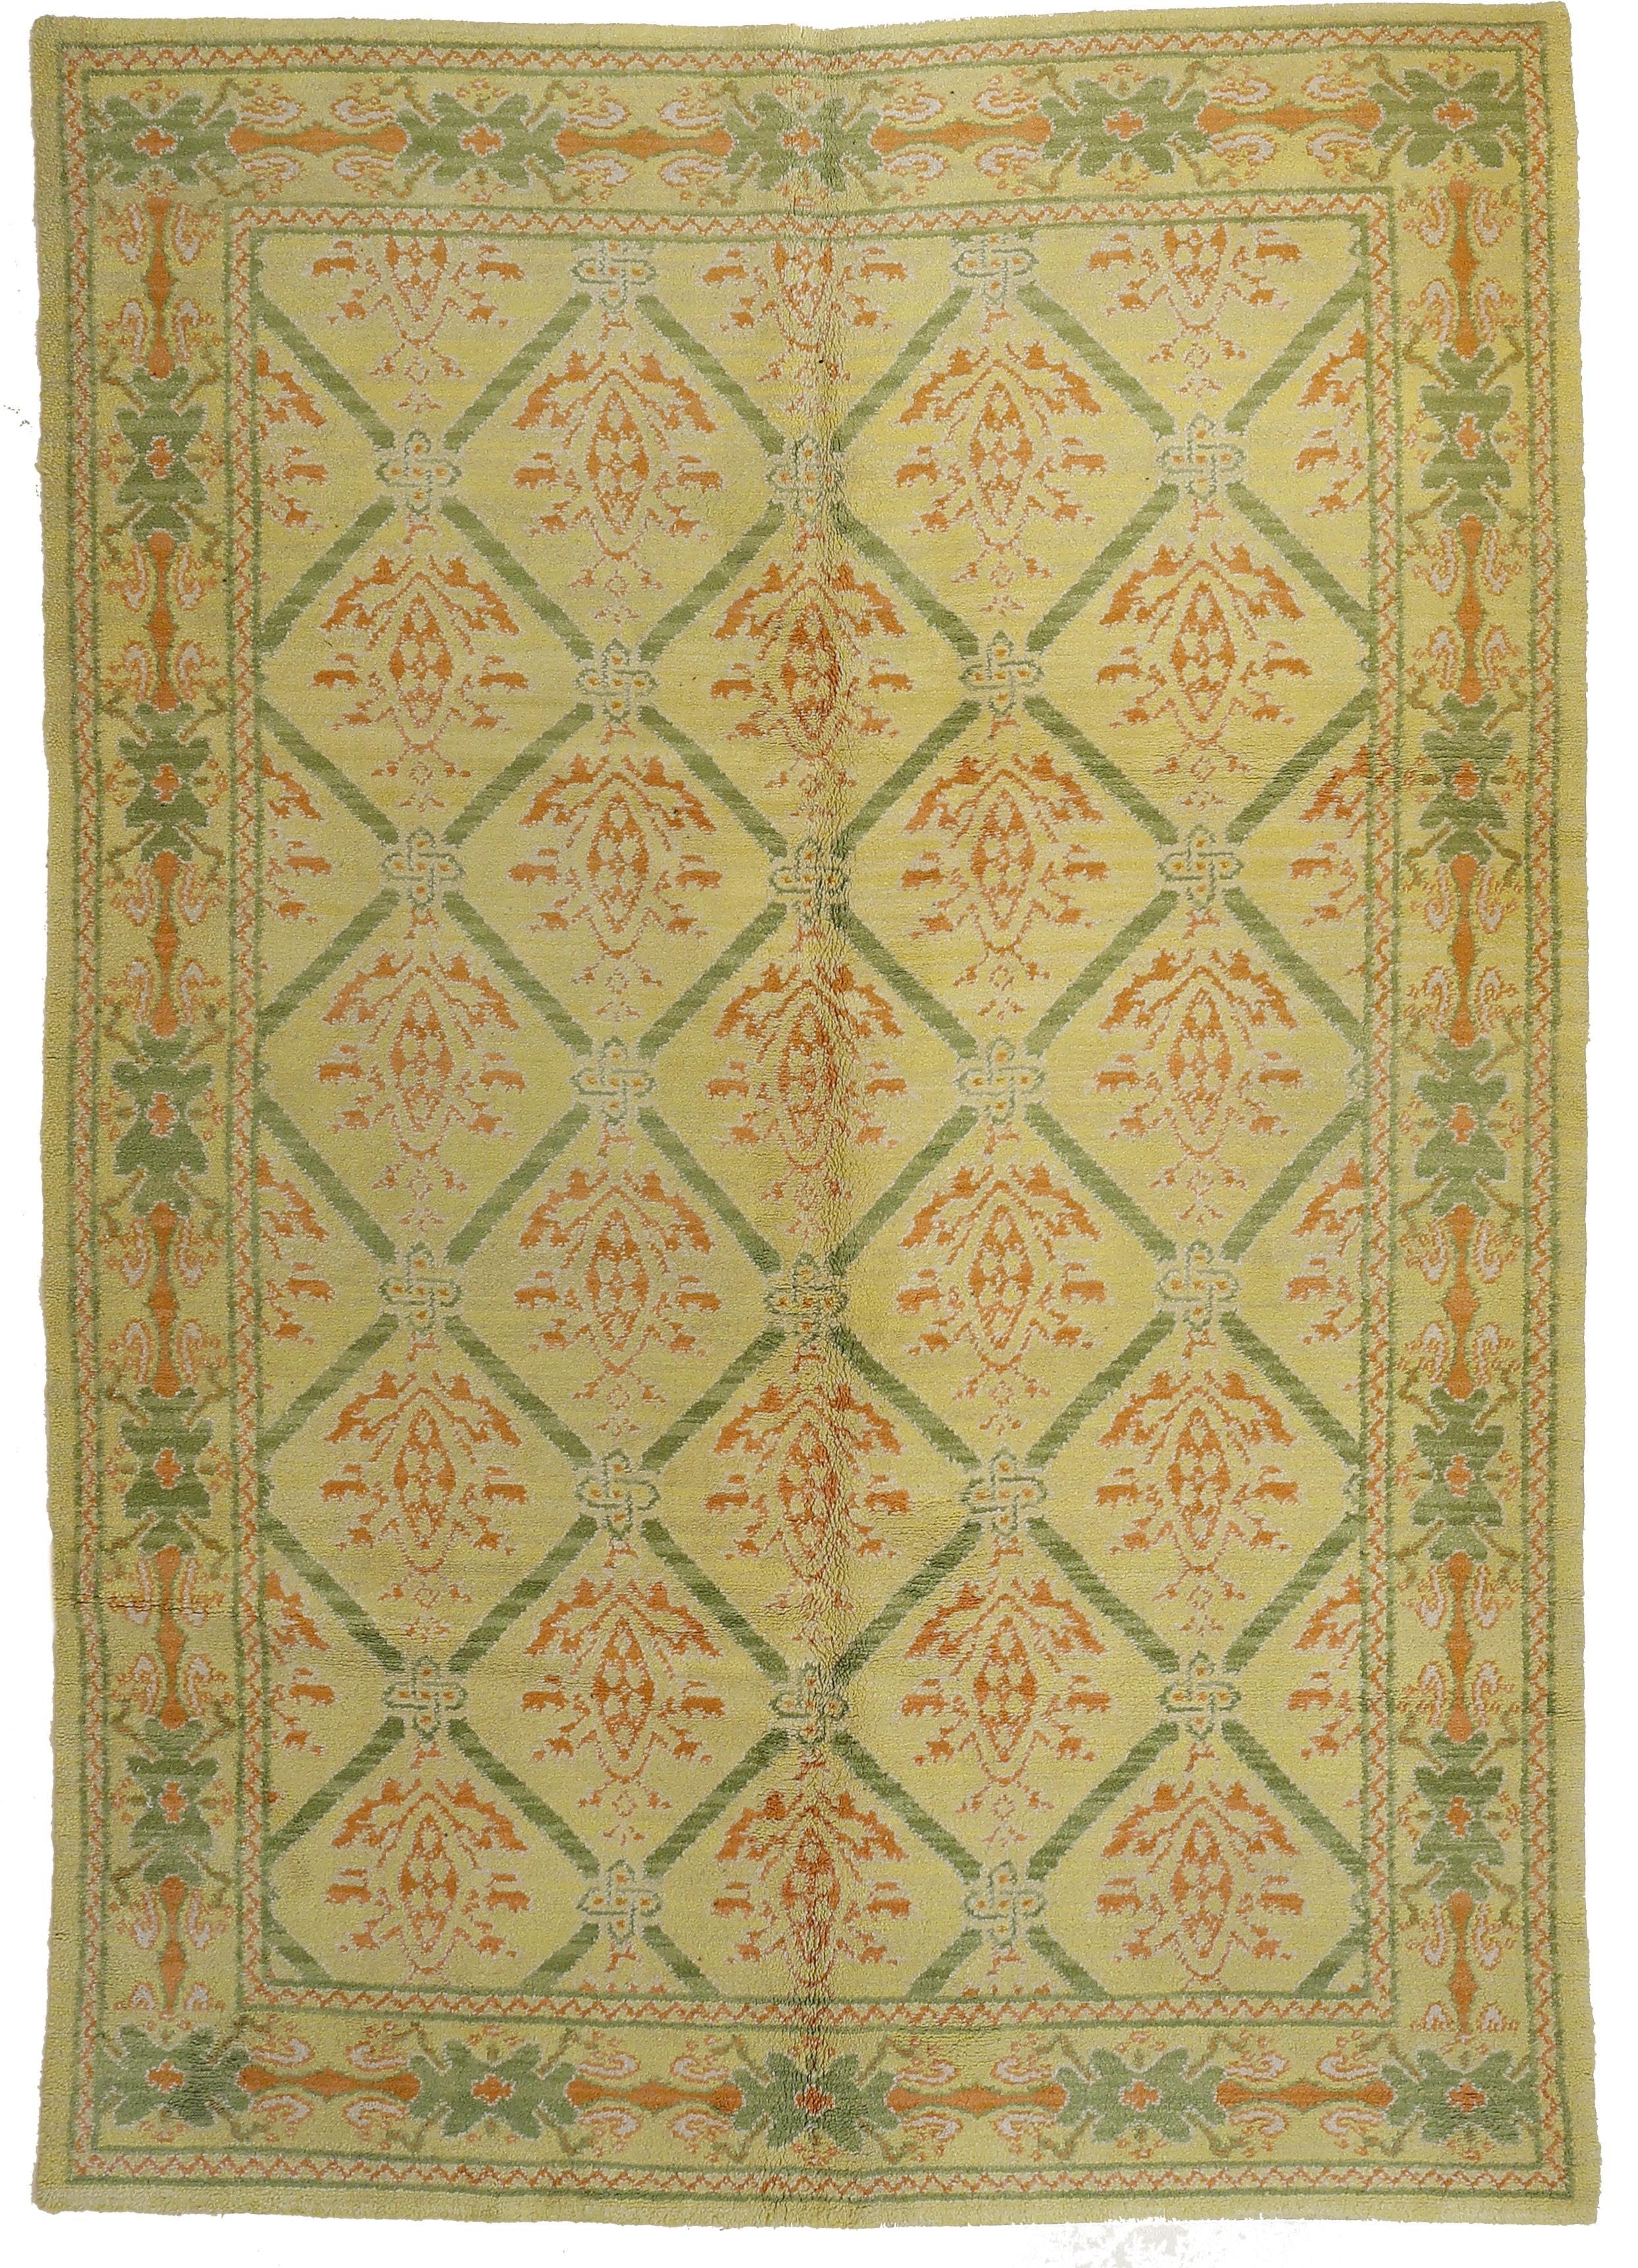 The court workshop called 'Real Fabrica de Tapices' has been active in Madrid since the 17th century, supplying handmade carpets woven with Turkish (symmetrical) knots to both the court as well as for export.
Throughout the 20th century their